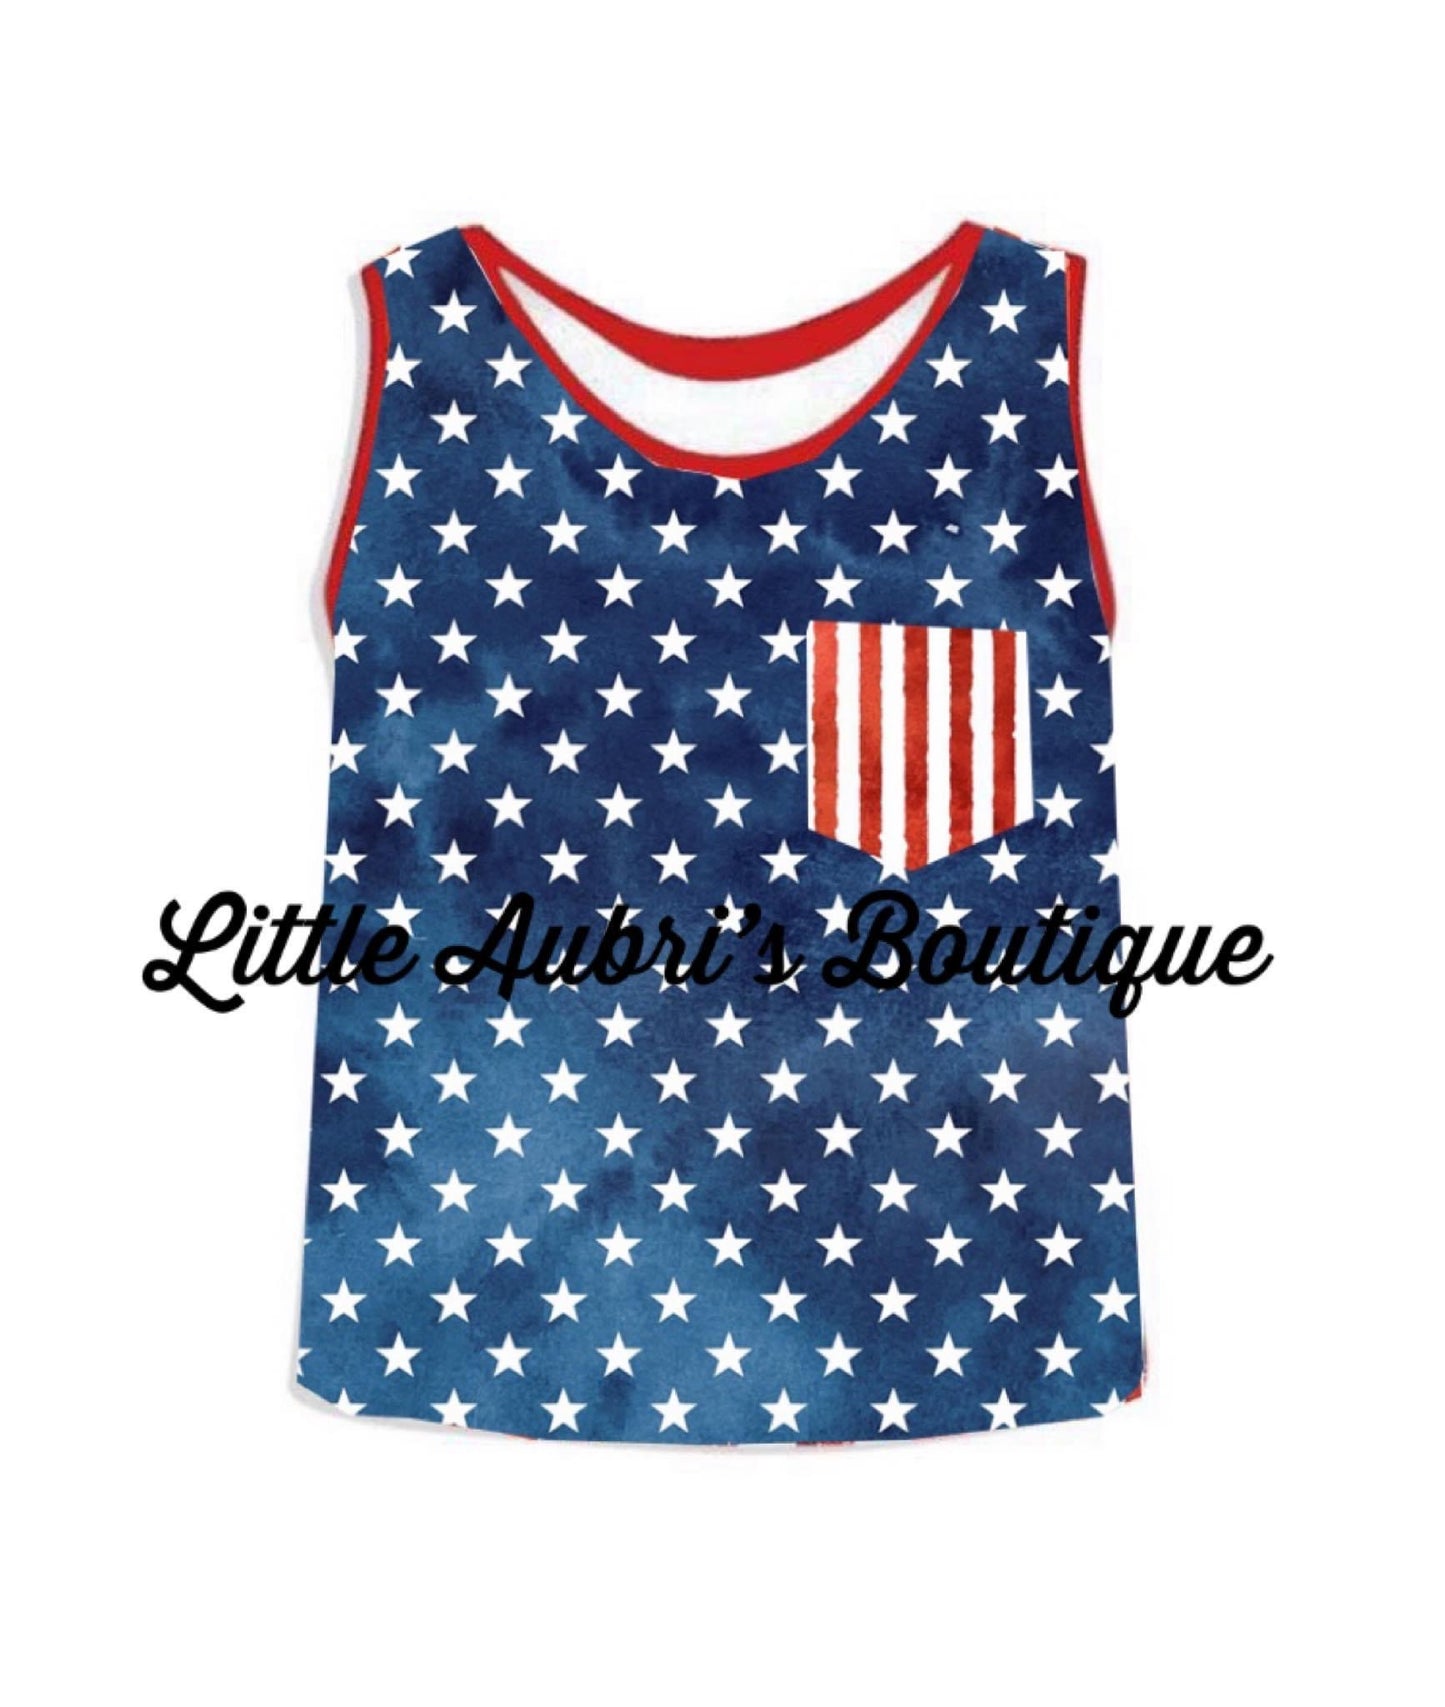 All American Style 2 Adult Unisex Tank